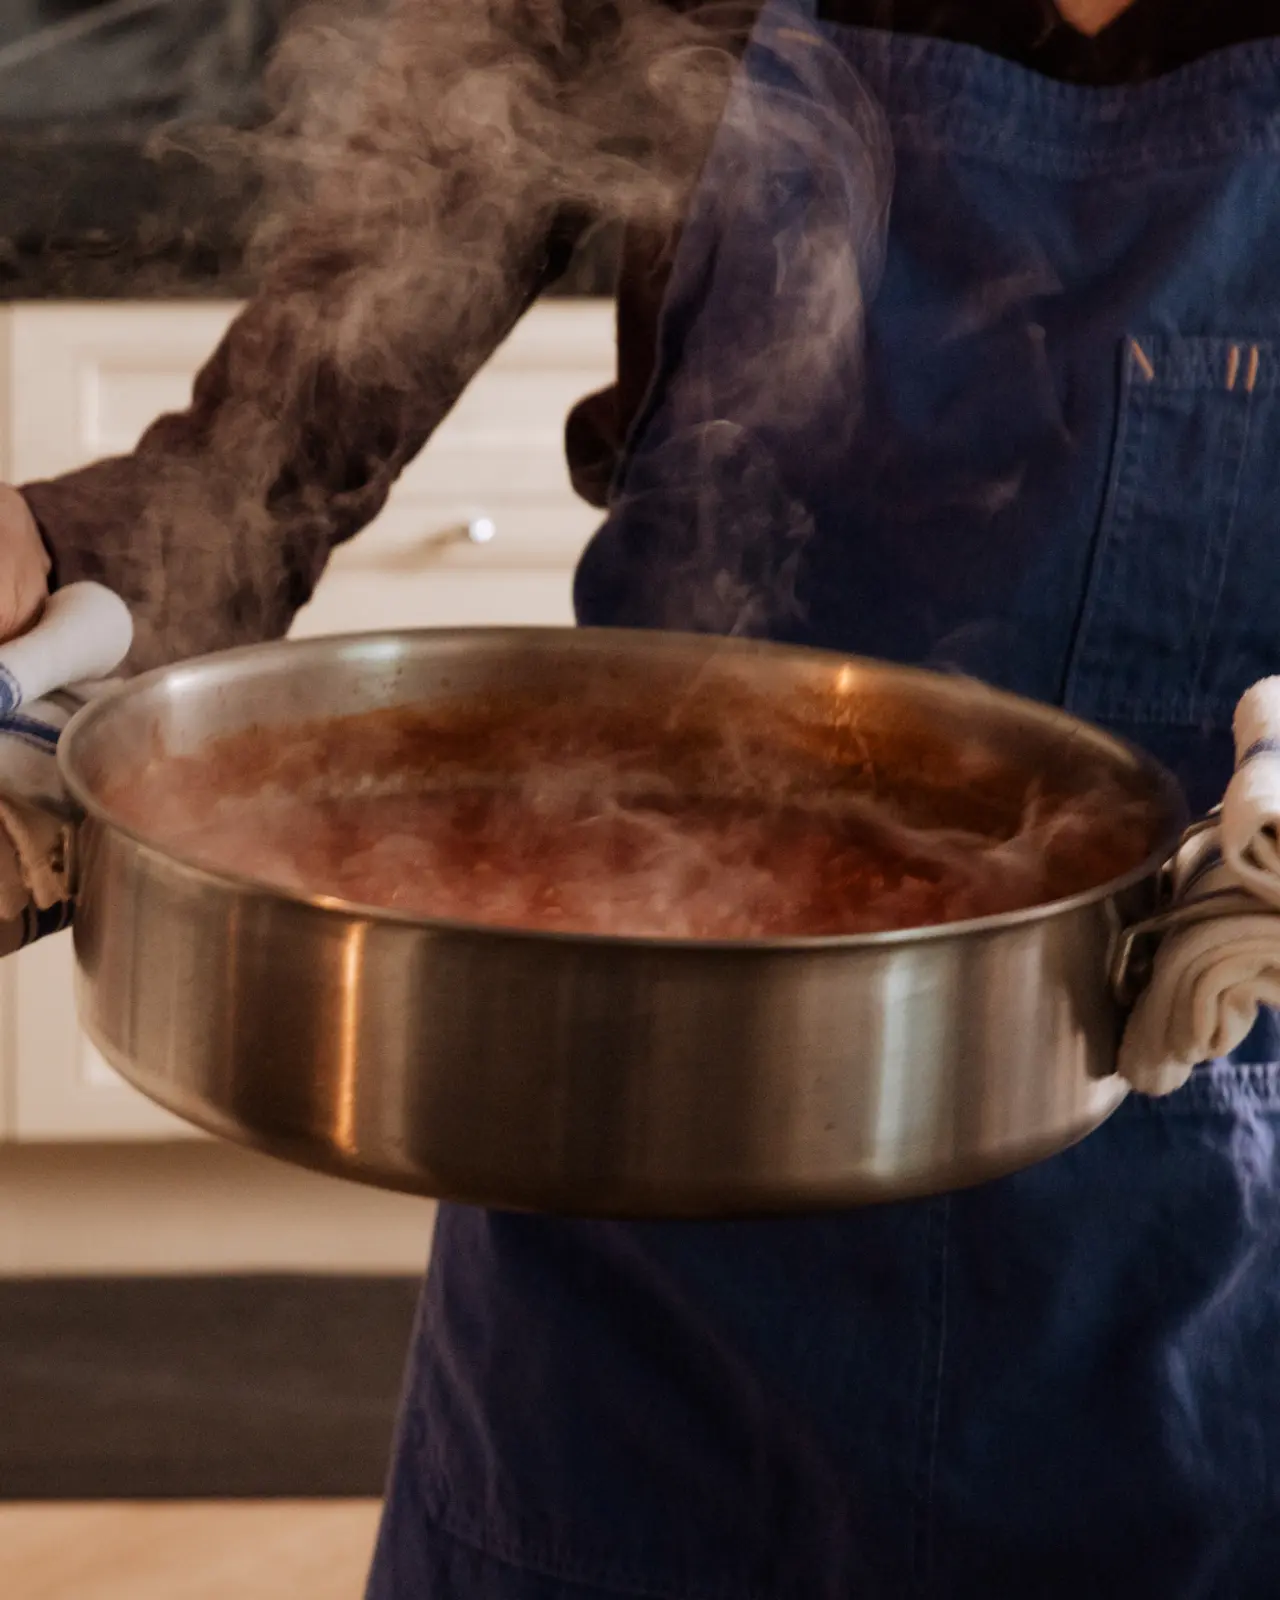 A person wearing an apron and oven mitts holds a steaming pot of food.